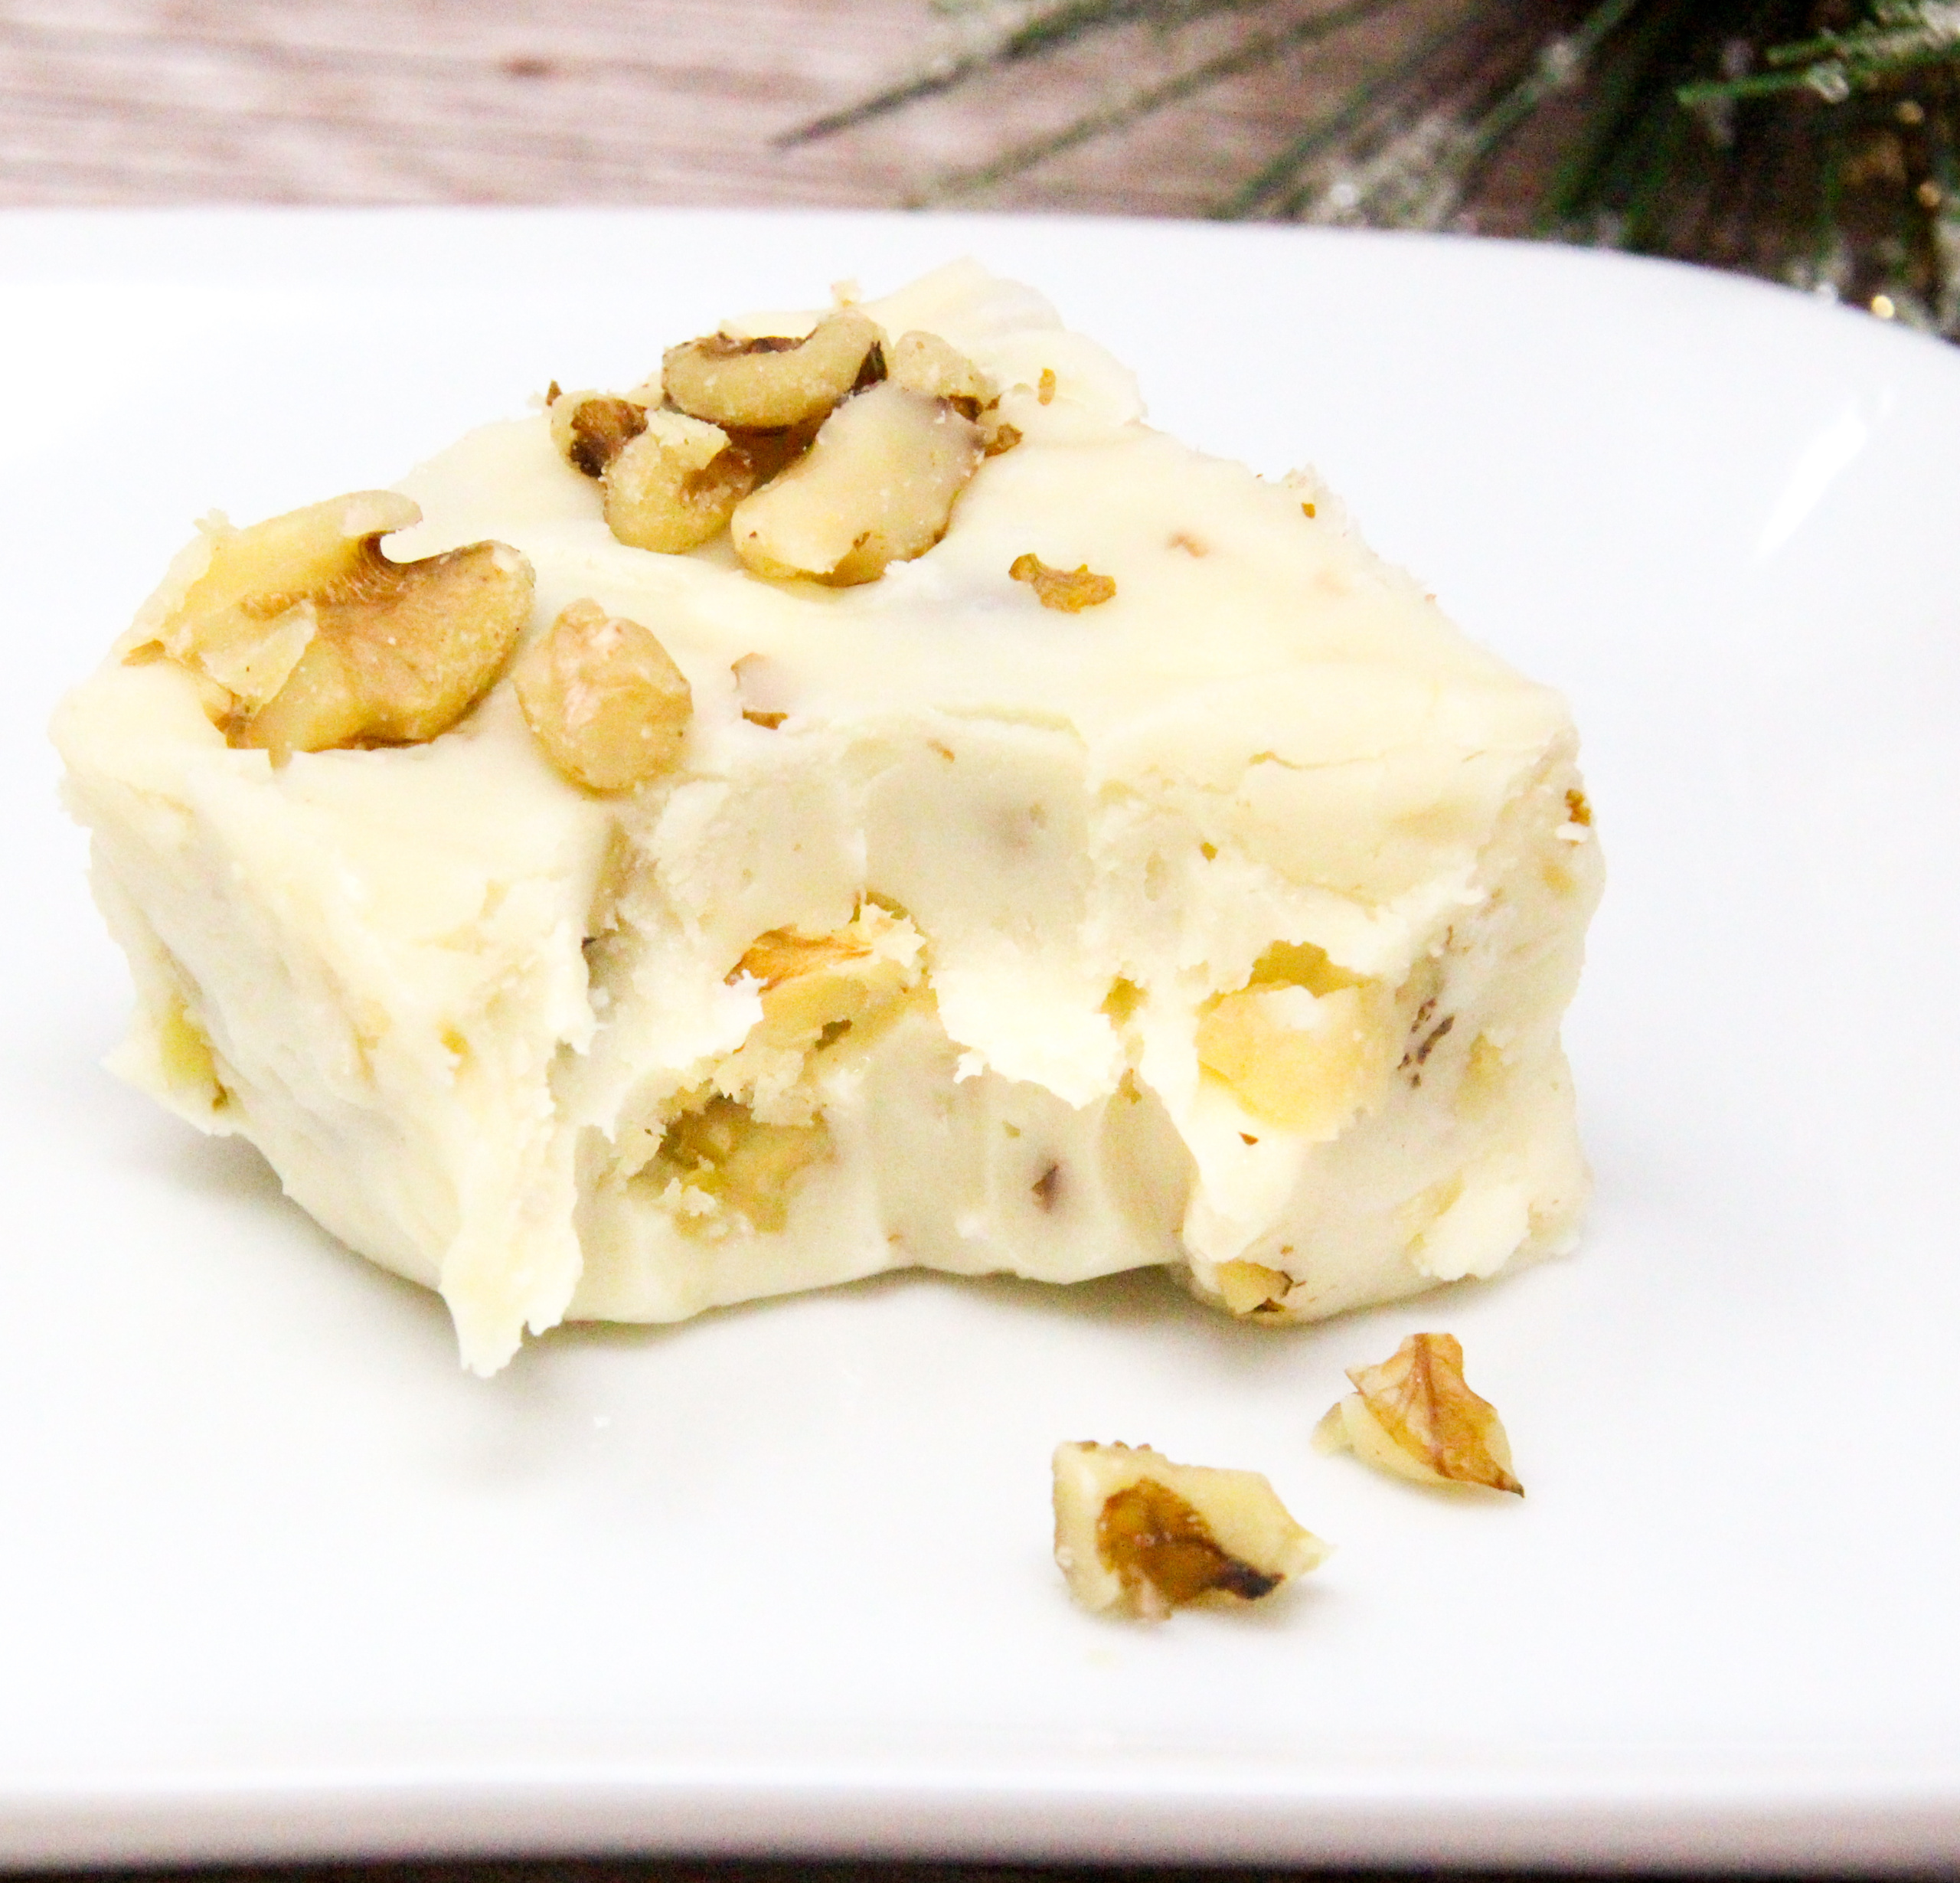 Using only six staple ingredients, and using the microwave to melt the white chocolate, Easy Maple Fudge comes together in a snap, making it a great addition to Christmas goodie platters or as a yummy gift to family and friends. Recipe shared with permission granted by Nancy Coco, author of HAVING A FUDGY CHRISTMAS TIME. 